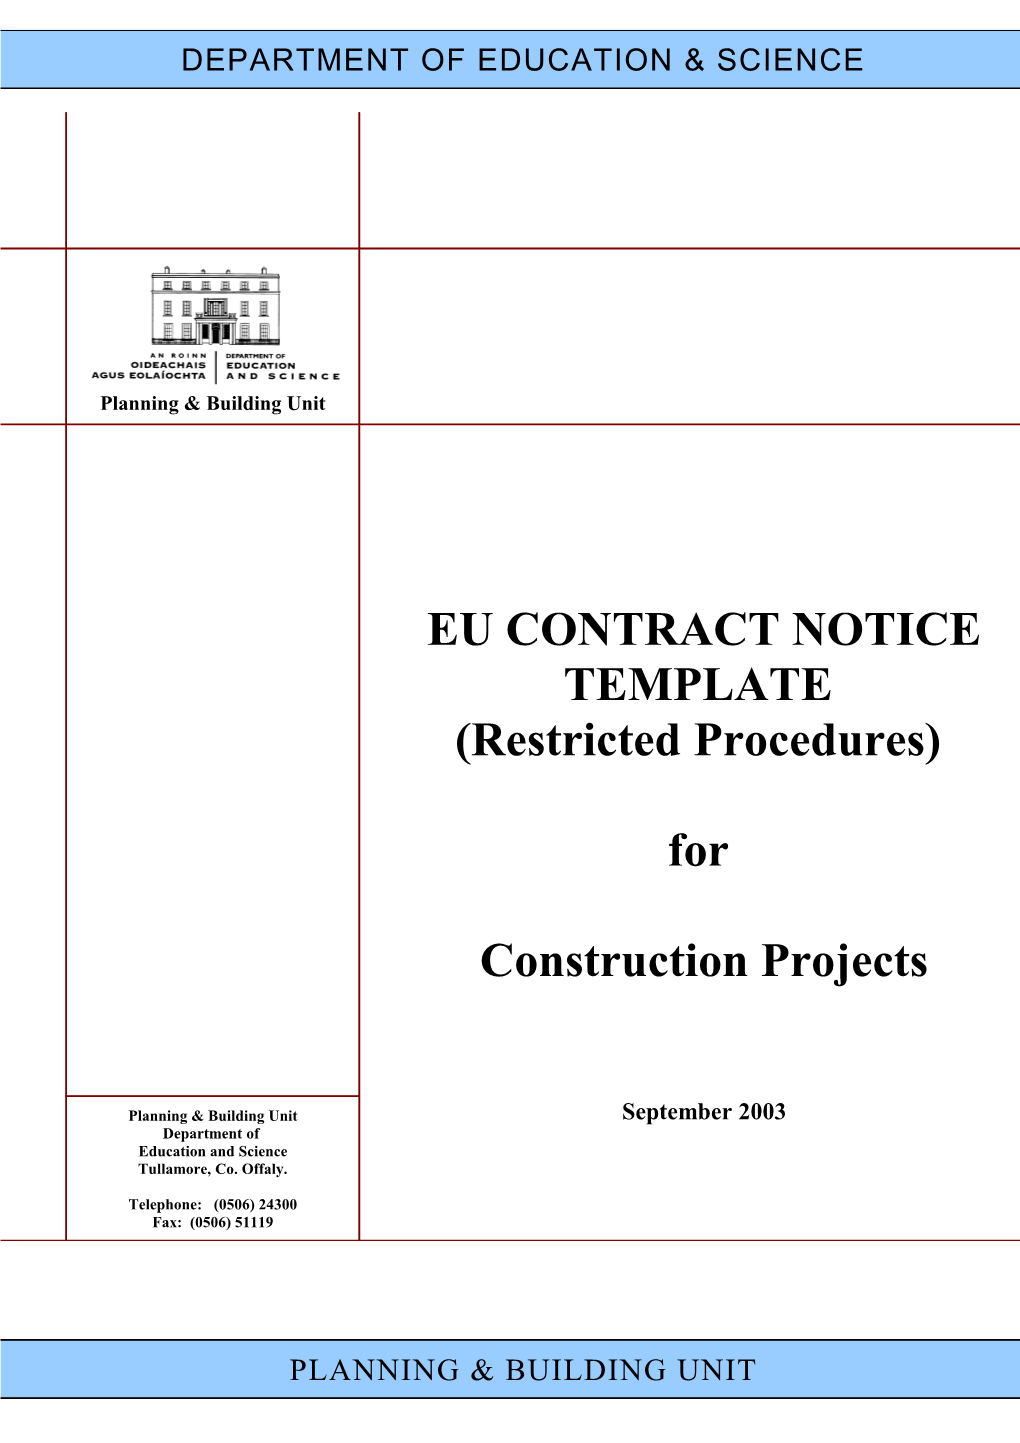 Sample EU Contract Notice Template for Construction Projects (EU1) (File Format Word 227KB)